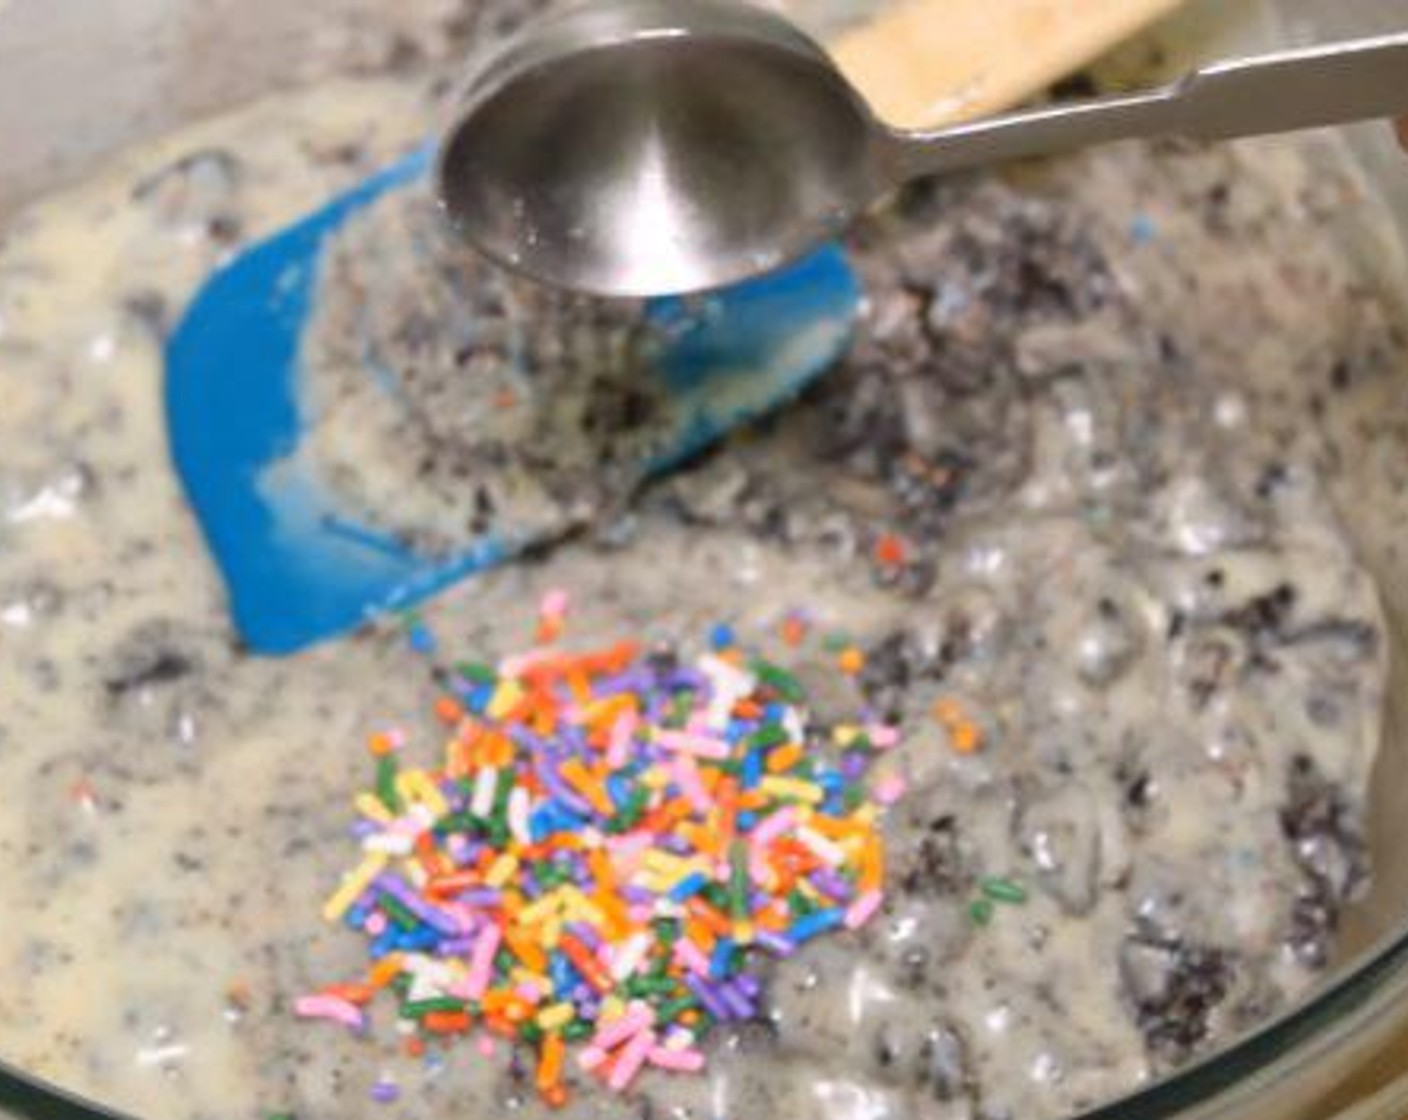 step 3 To the melted chocolate, add Vanilla Extract (1 tsp) and whisk gently. Add the crushed Oreo and fold everything together. Add the Sprinkles (3 Tbsp) and fold them in.